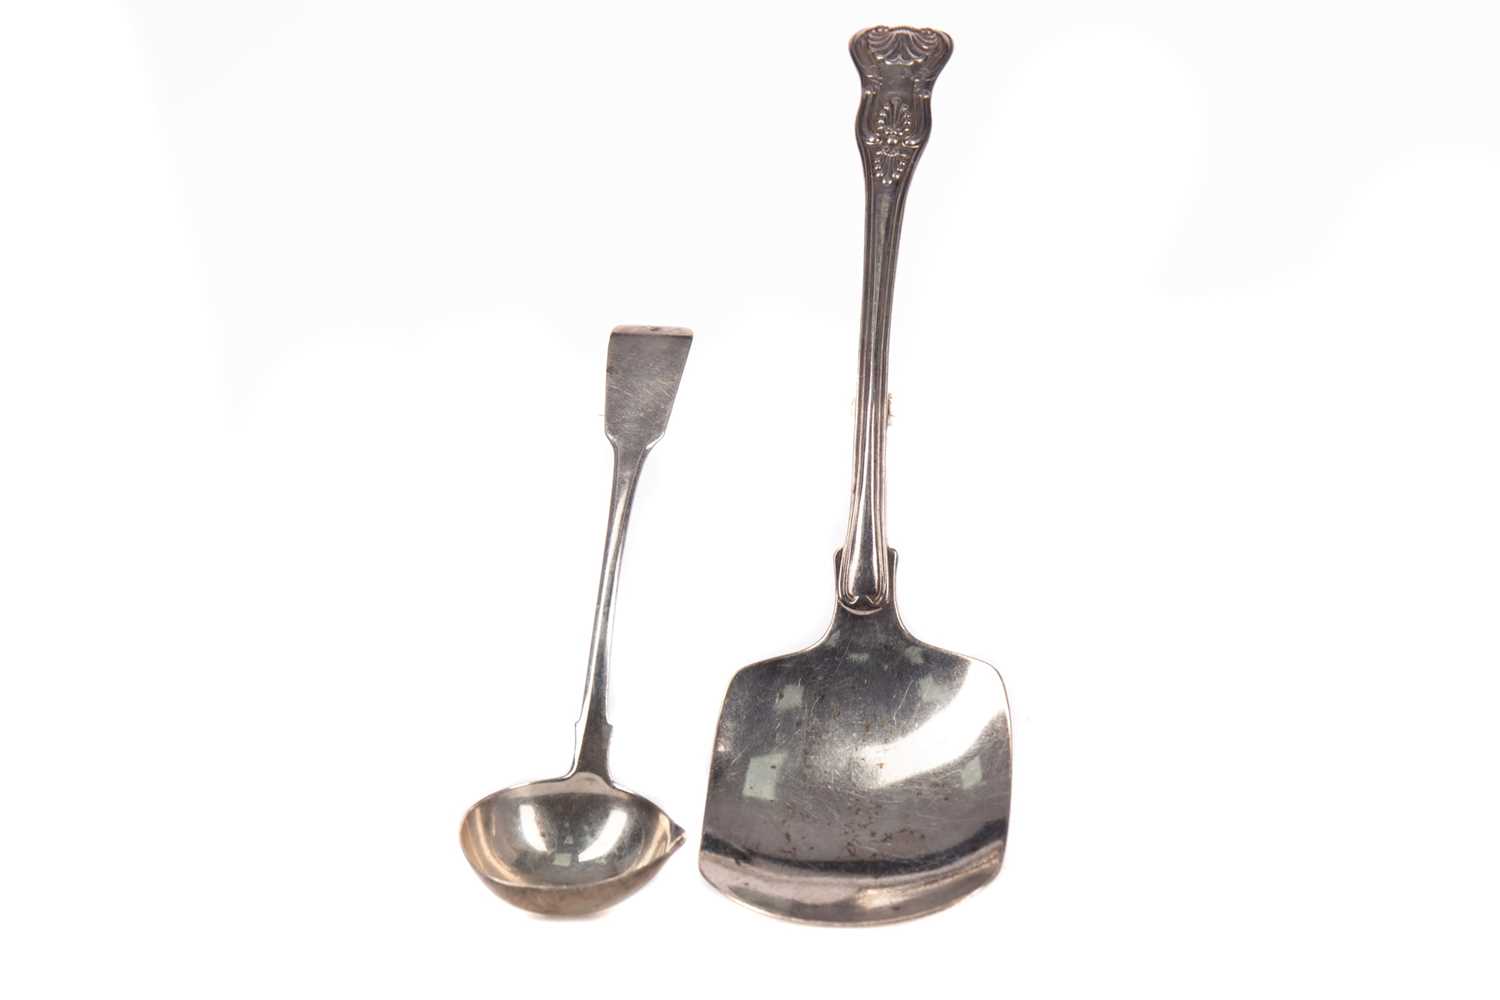 Lot 533 - A WILLIAM IV SILVER PASTRY SCOOP AND AN IRISH SAUCE LADLE